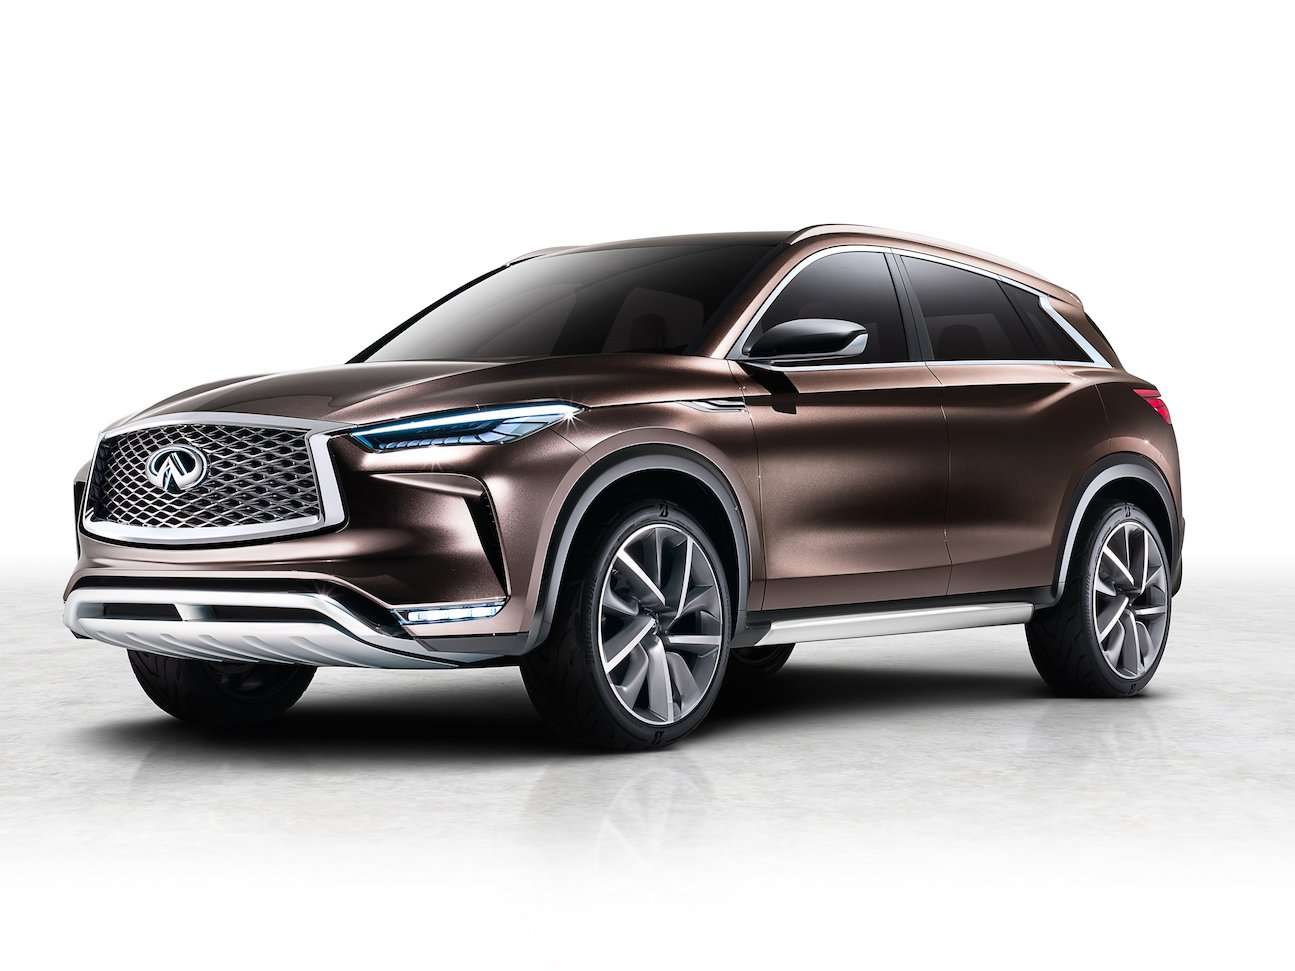 Infiniti’s QX50 mid-size SUV, which is making its debut at the Shanghai Auto Show. Photo: SCMP Handout